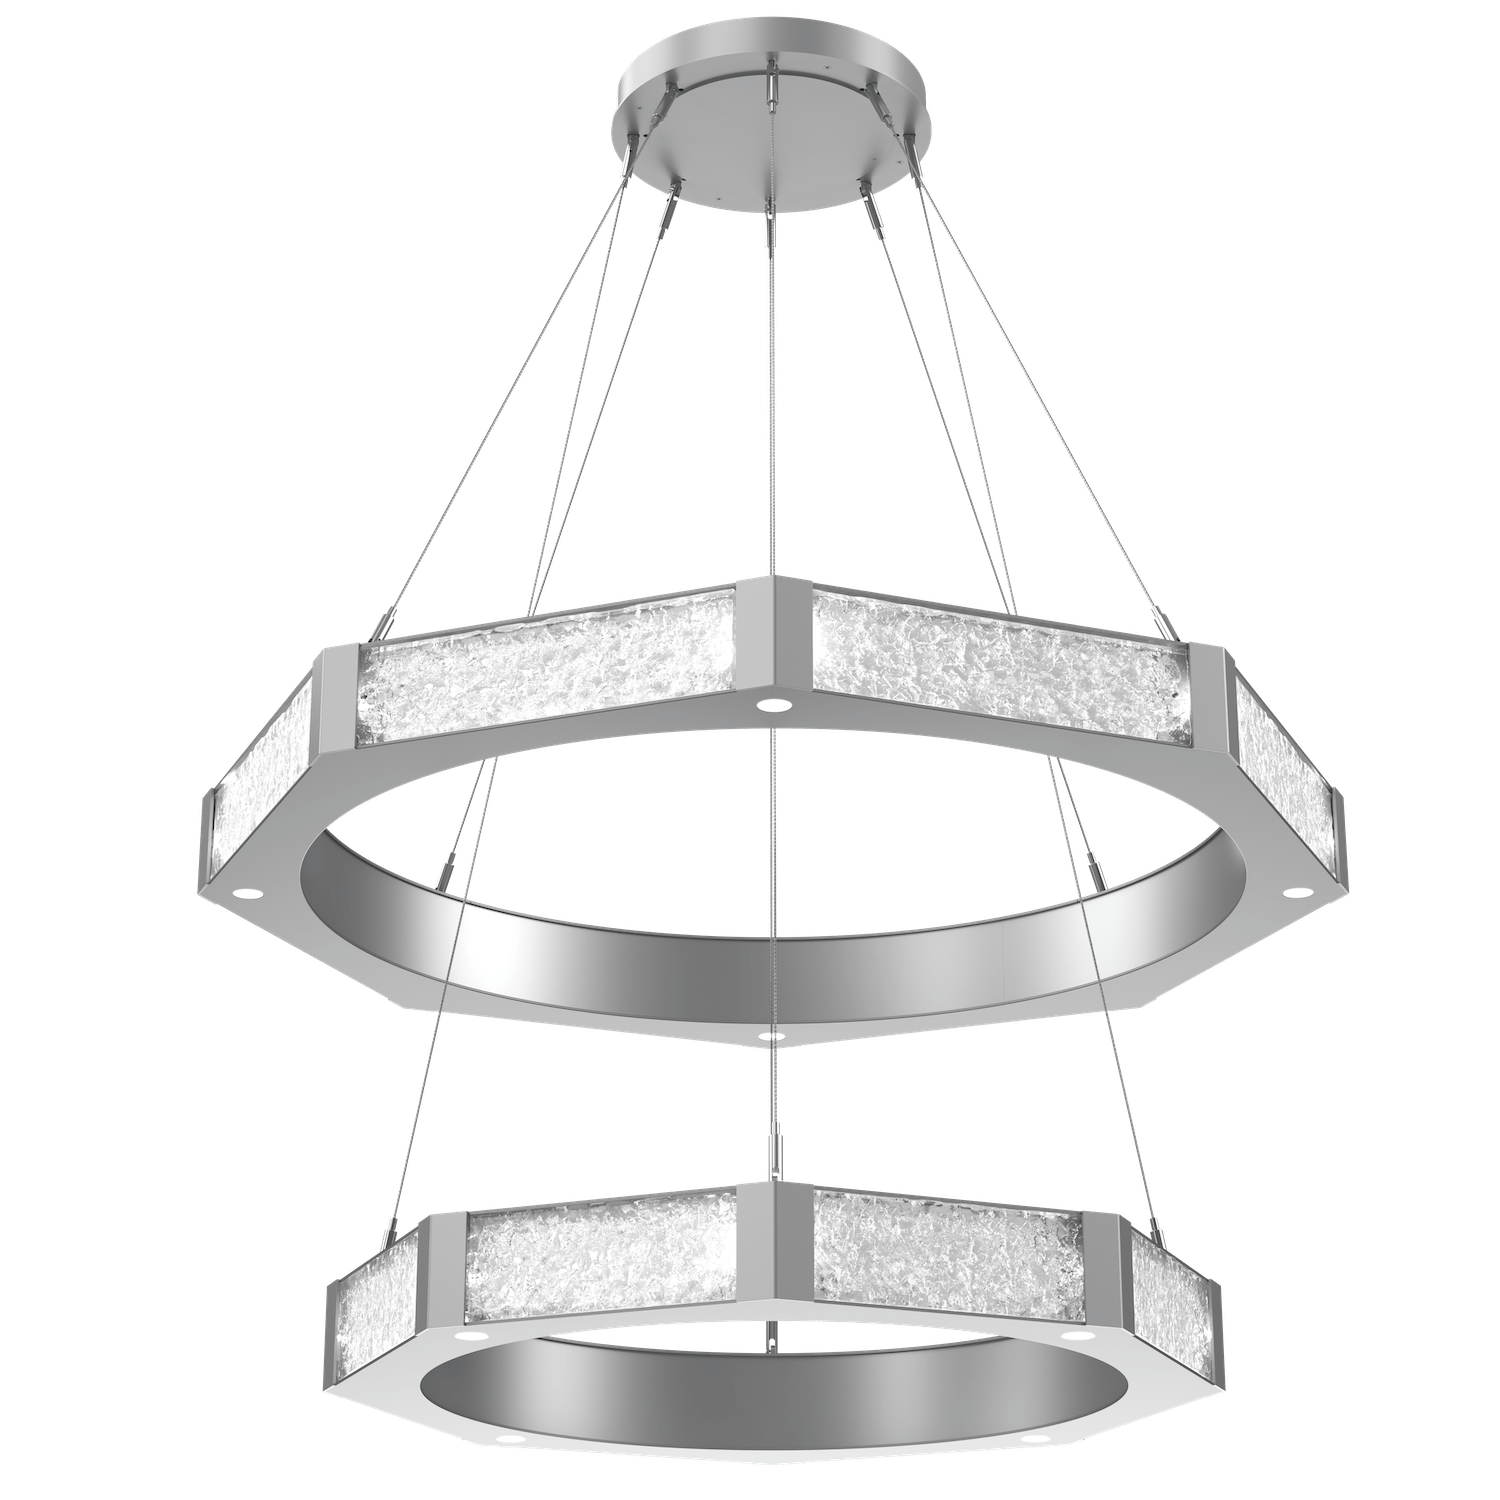 CHB0061-2B-CS-GC-Hammerton-Studio-Glacier-48-inch-two-tier-ring-chandelier-with-classic-silver-finish-and-clear-blown-glass-with-geo-clear-cast-glass-diffusers-and-LED-lamping